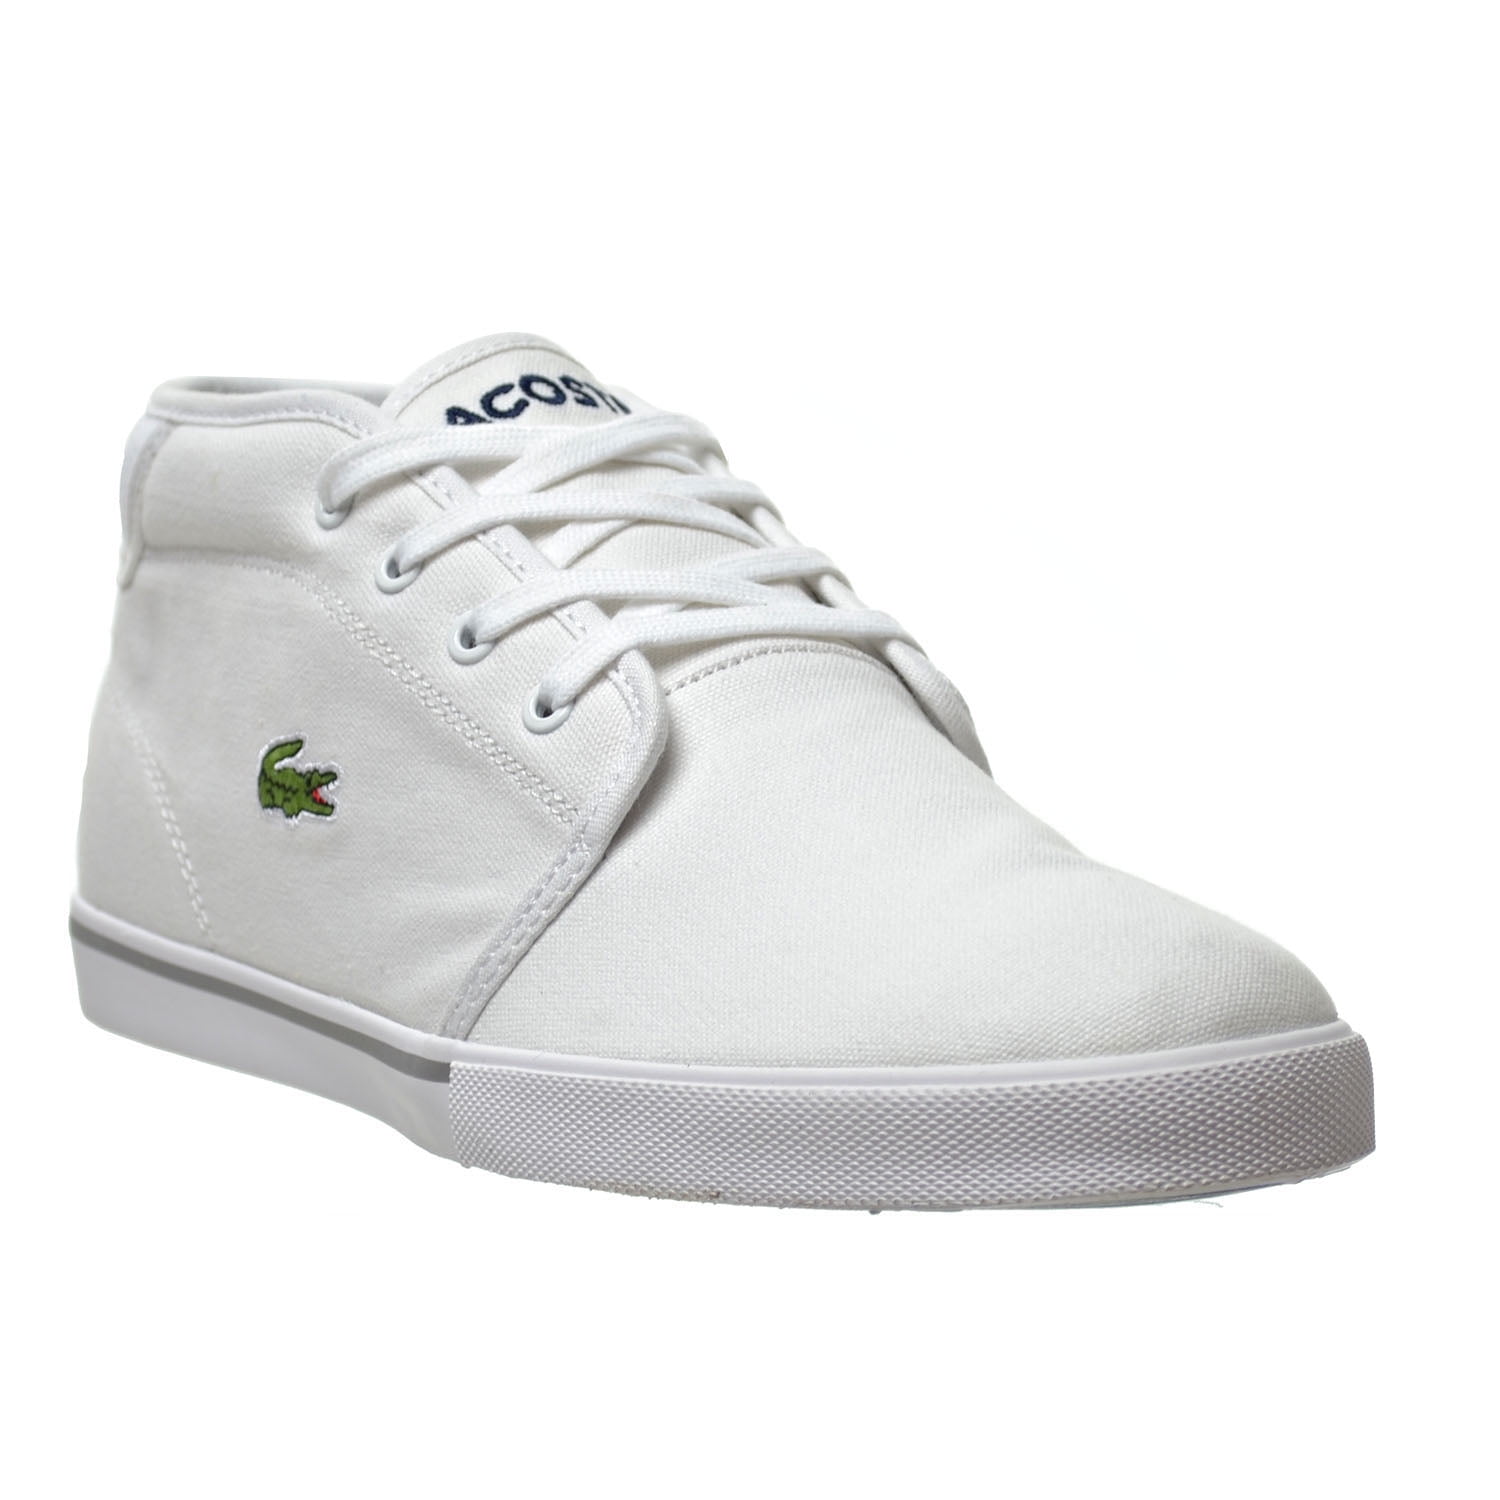 Bot Baron afspejle Lacoste Ampthill Lcr2 Smp Sneakers White White - Walmart.com